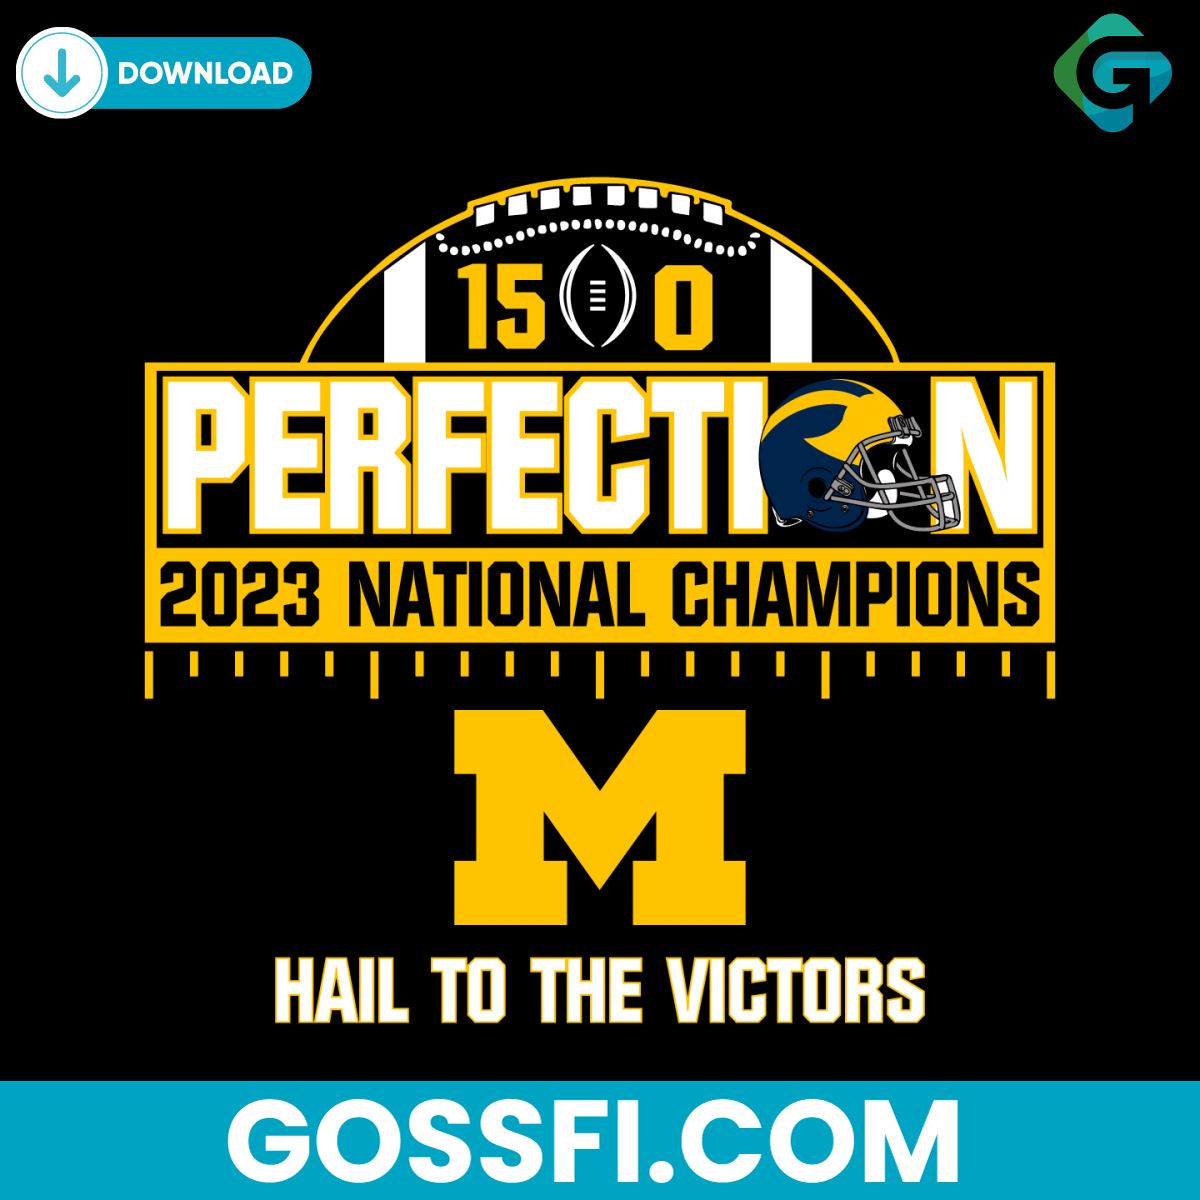 perfection-2023-national-champions-hail-to-the-victors-svg